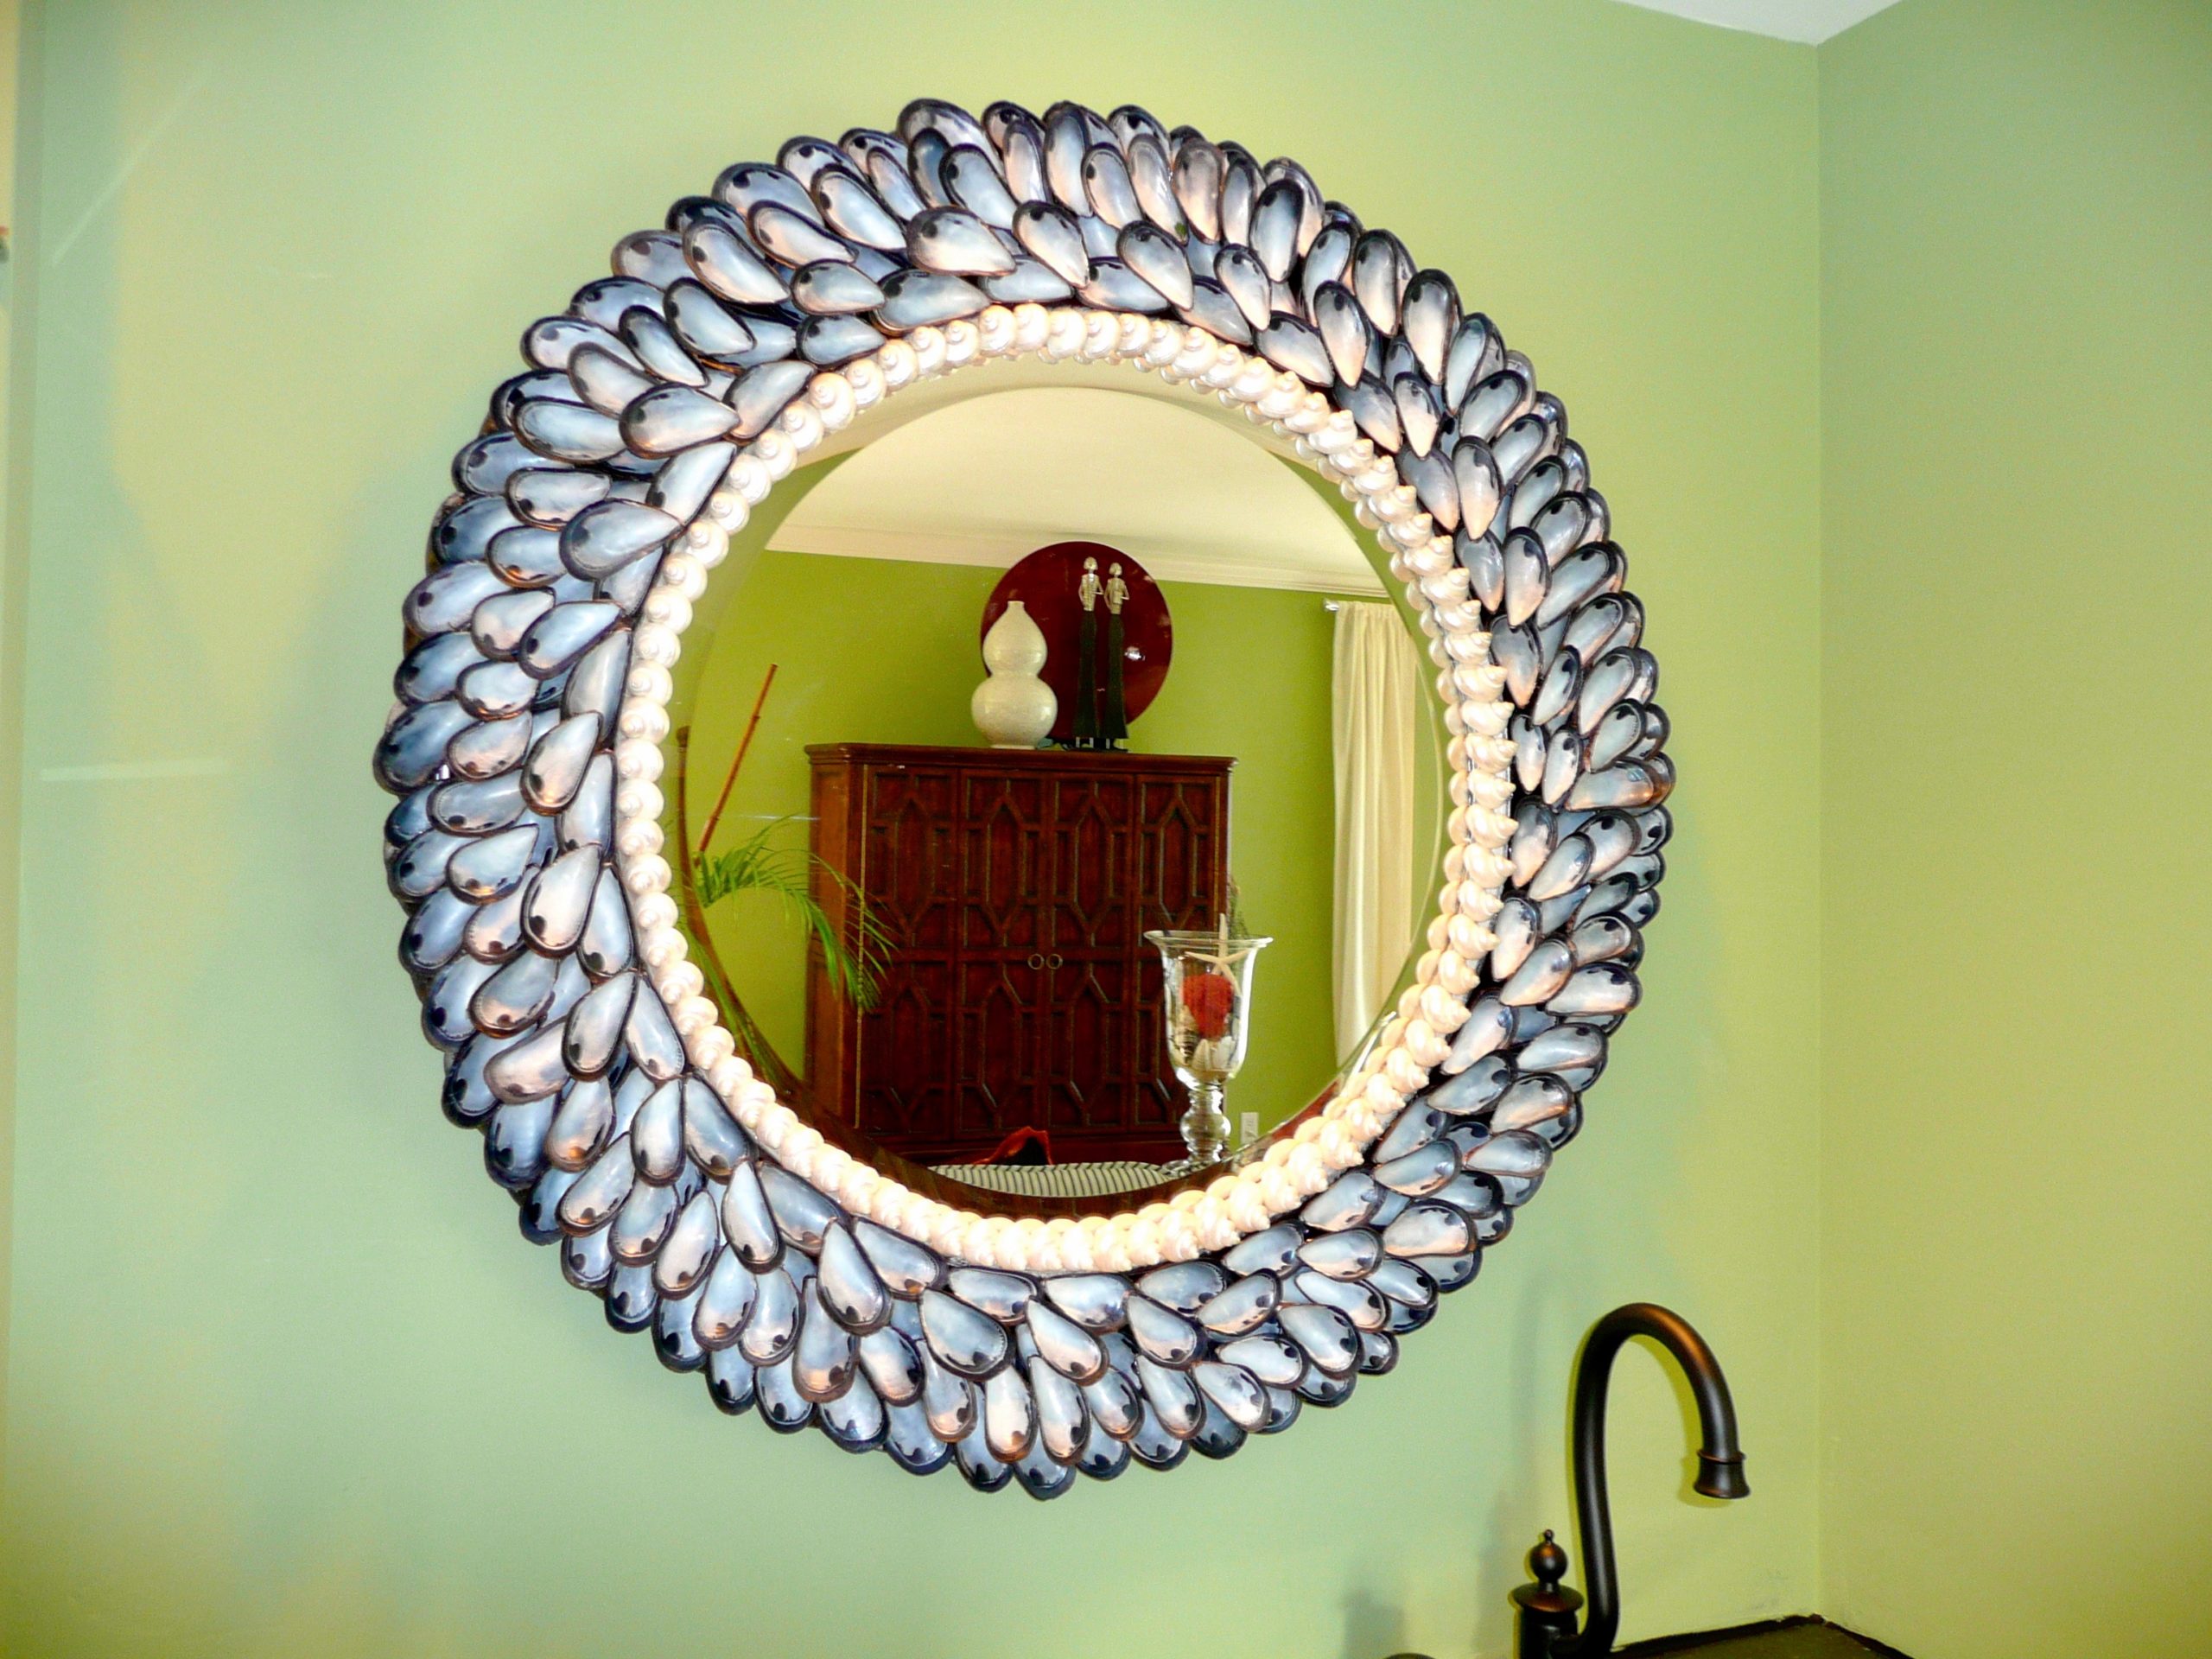 A round shell mirror made with mussel shells on a green wall reflecting an armoire